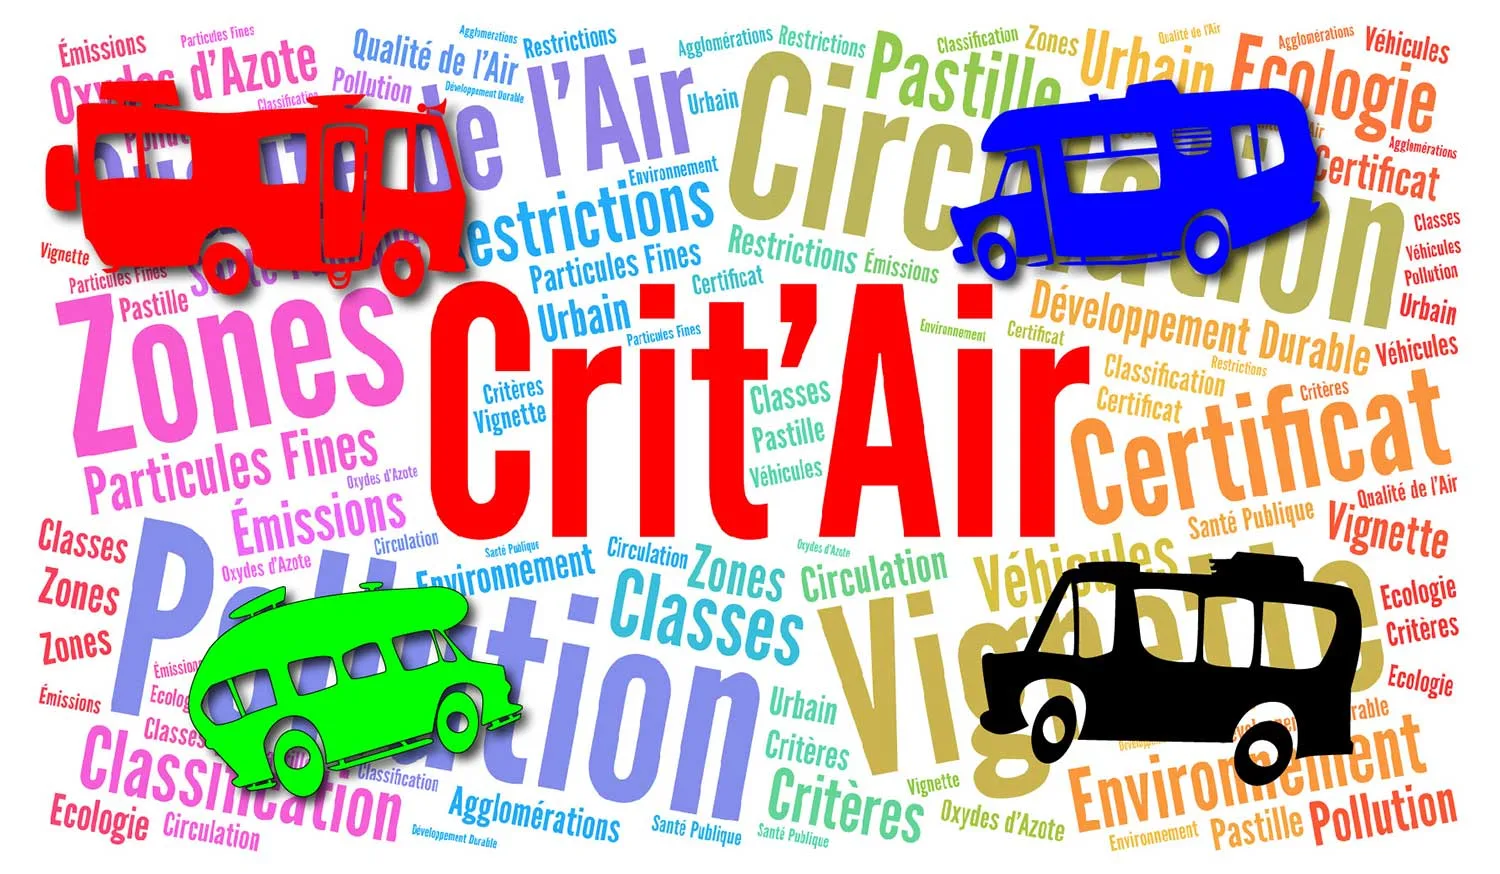 Crit'Air Criteria - does your car need a vignette to avoid fines?